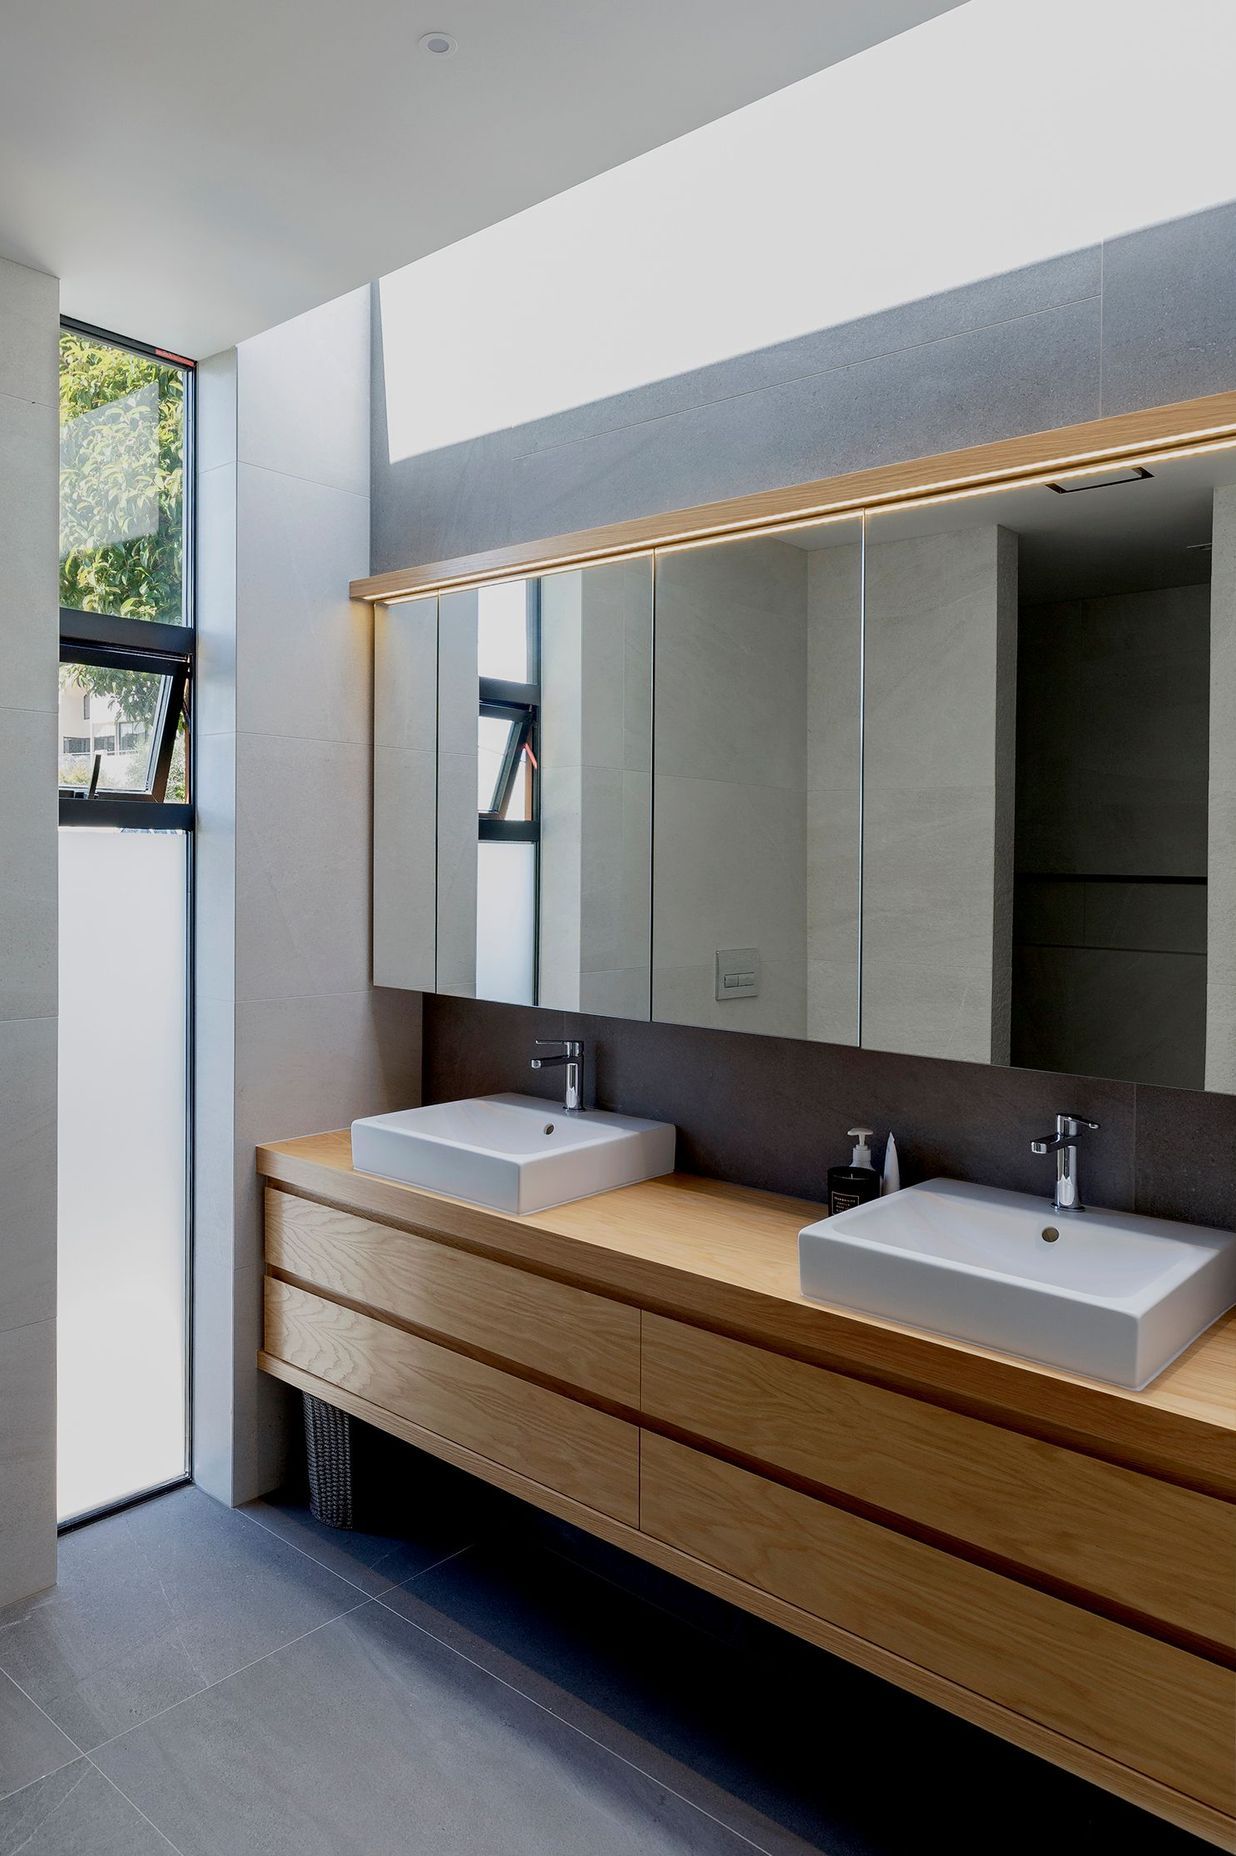 The bathroom features a clerestory window for extra light and robust basalt flooring tiles.